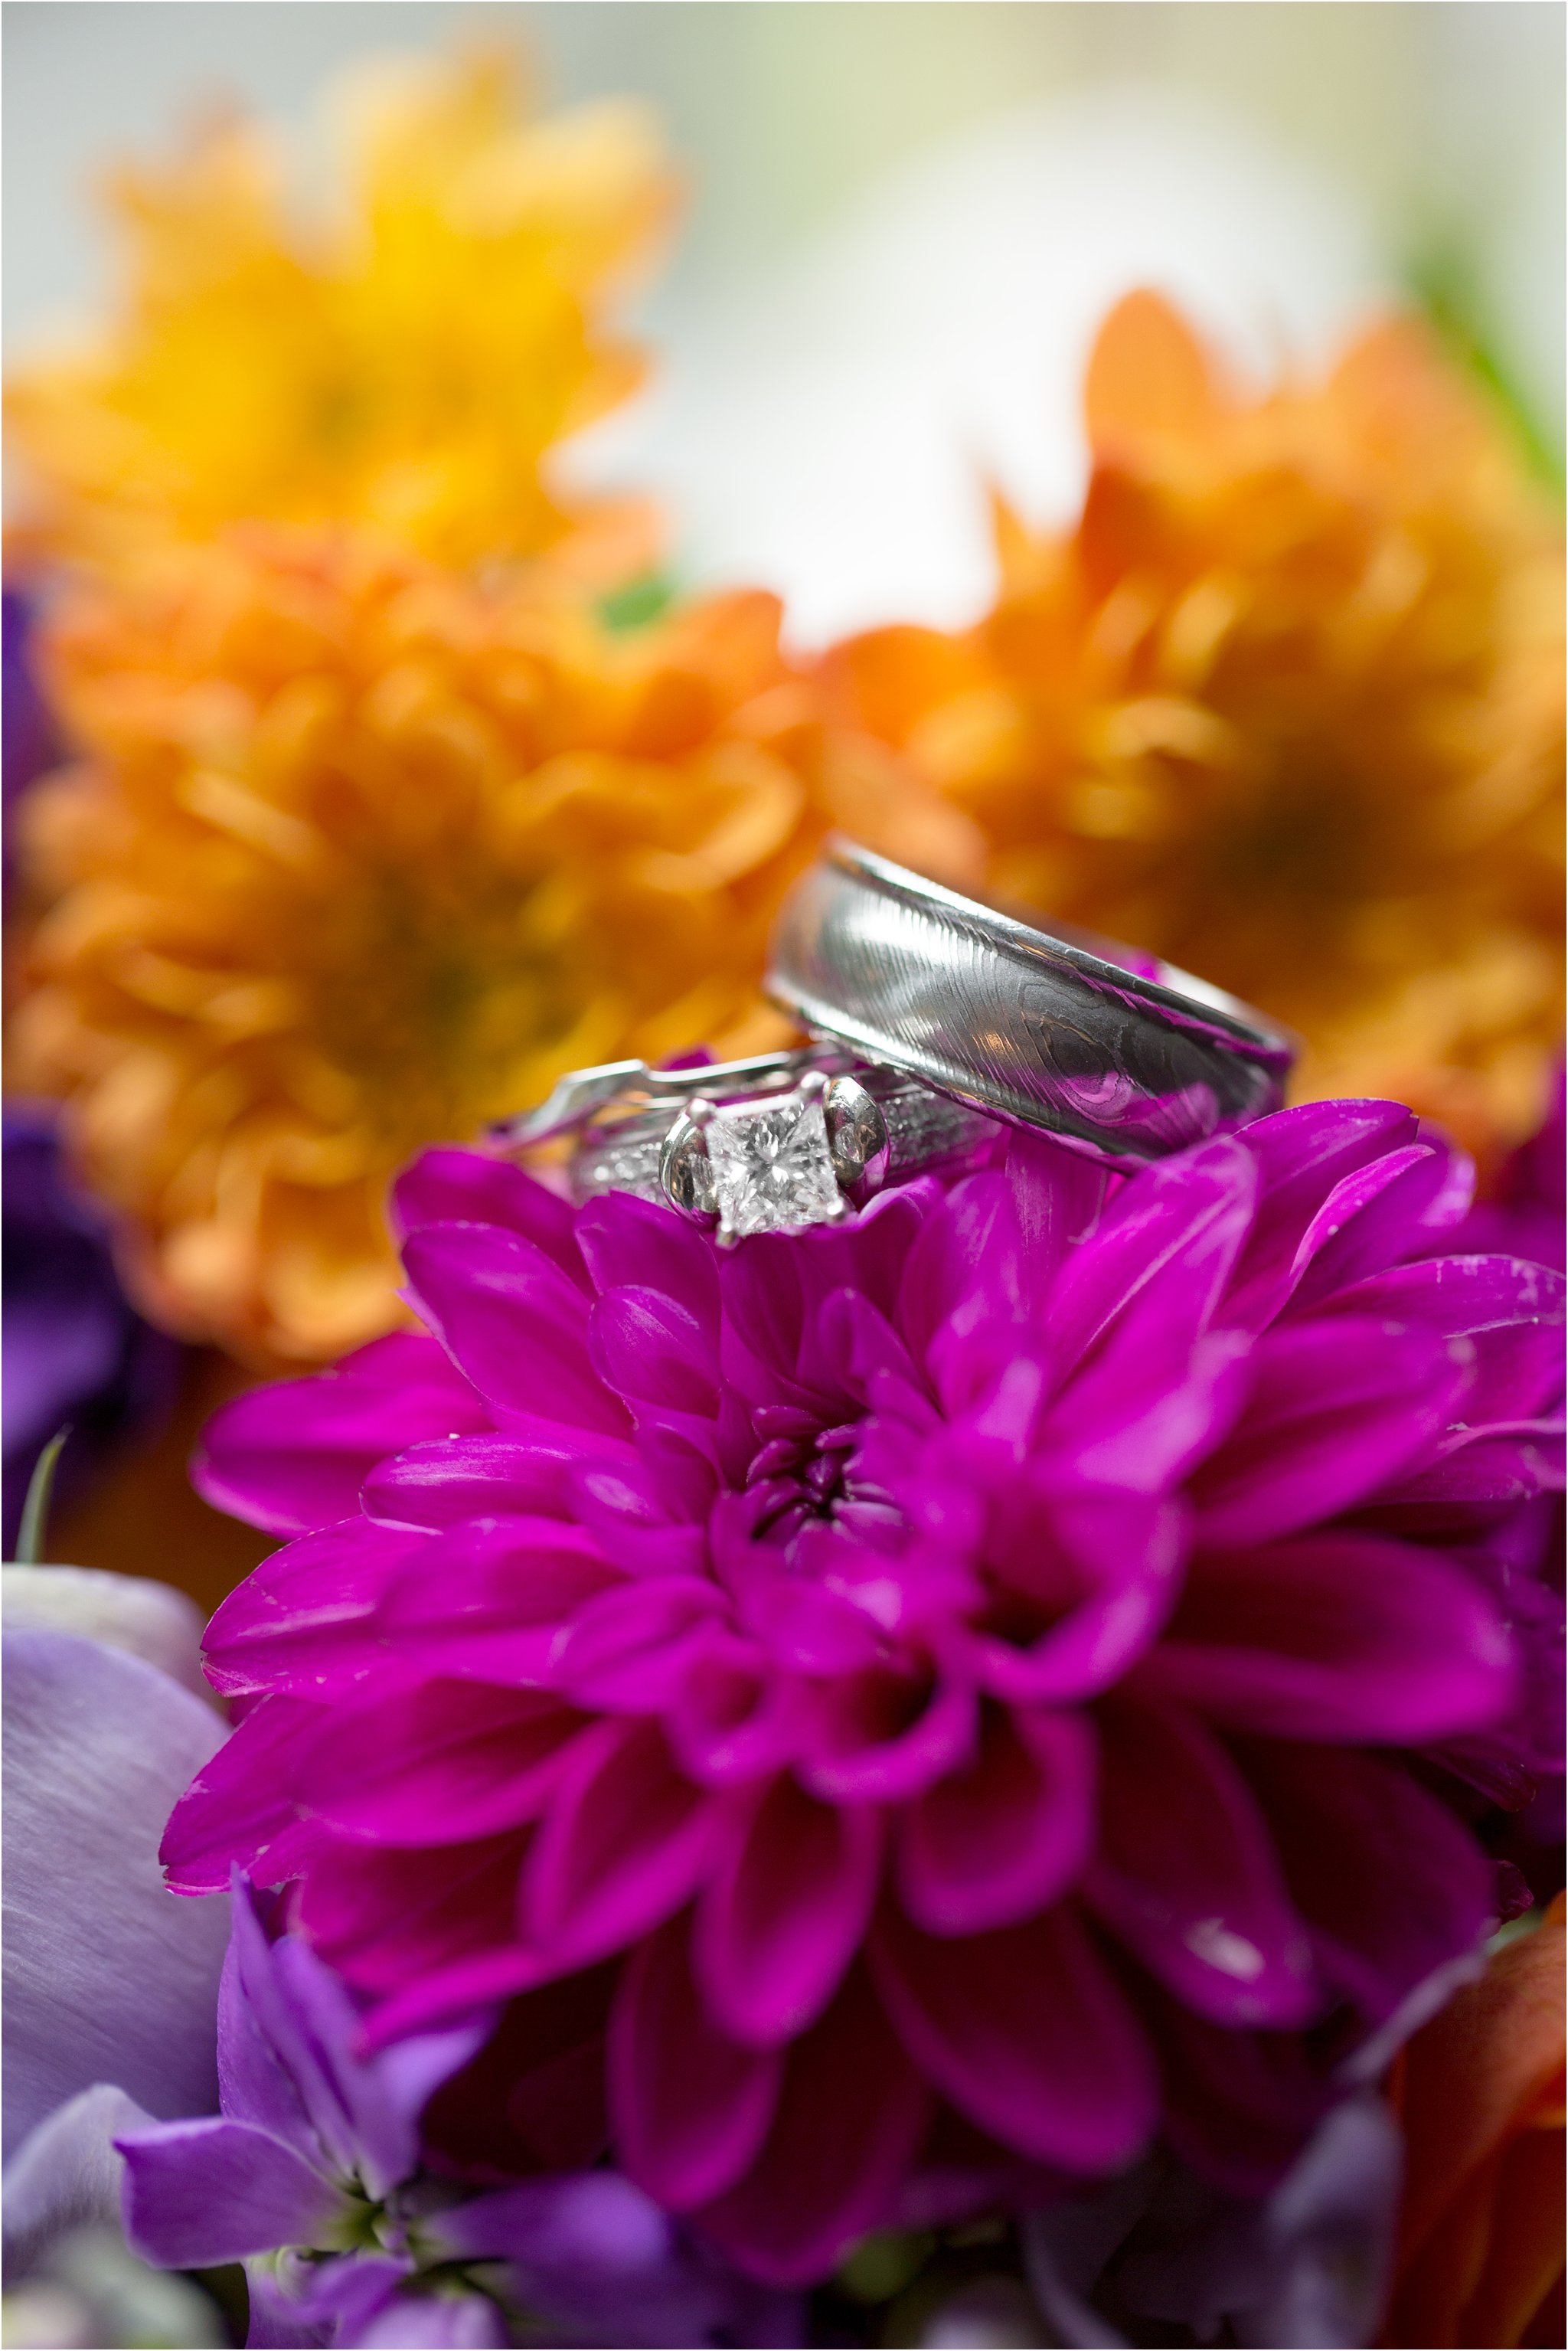 Wedding rings and fall bridal bouquet